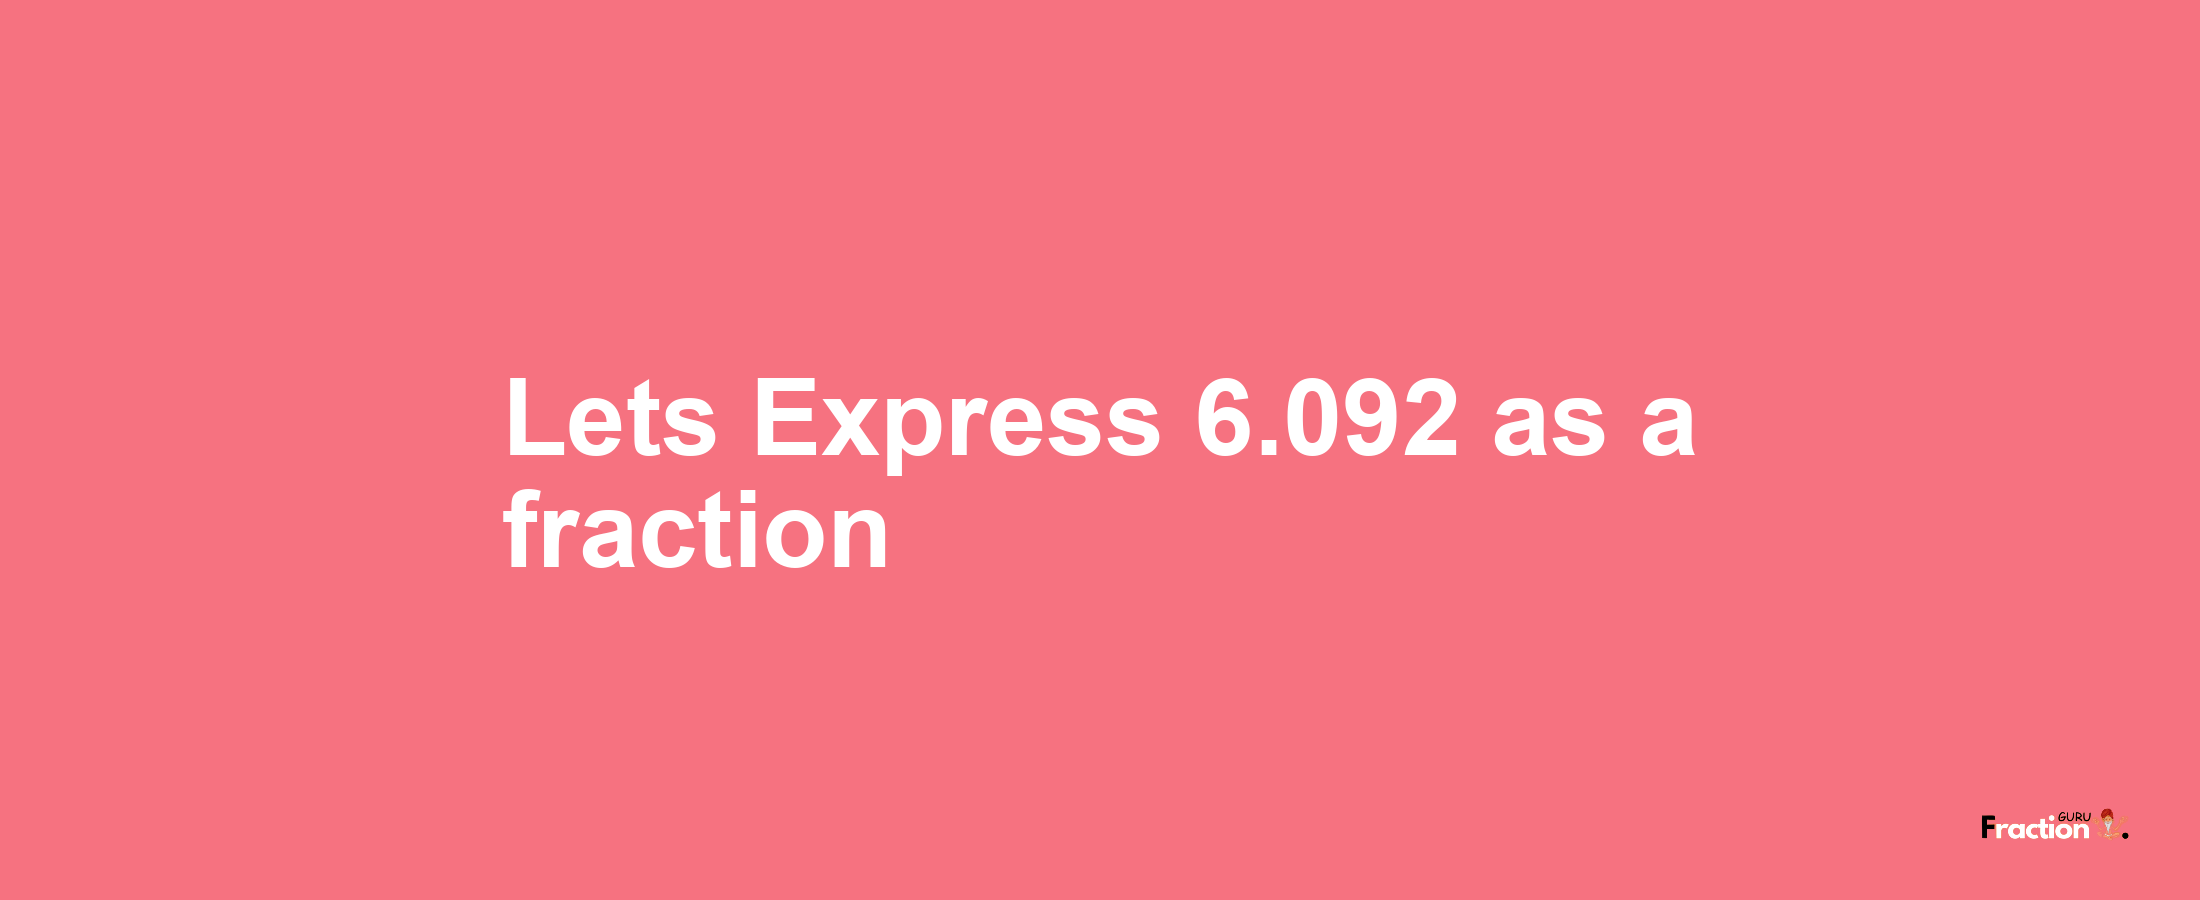 Lets Express 6.092 as afraction